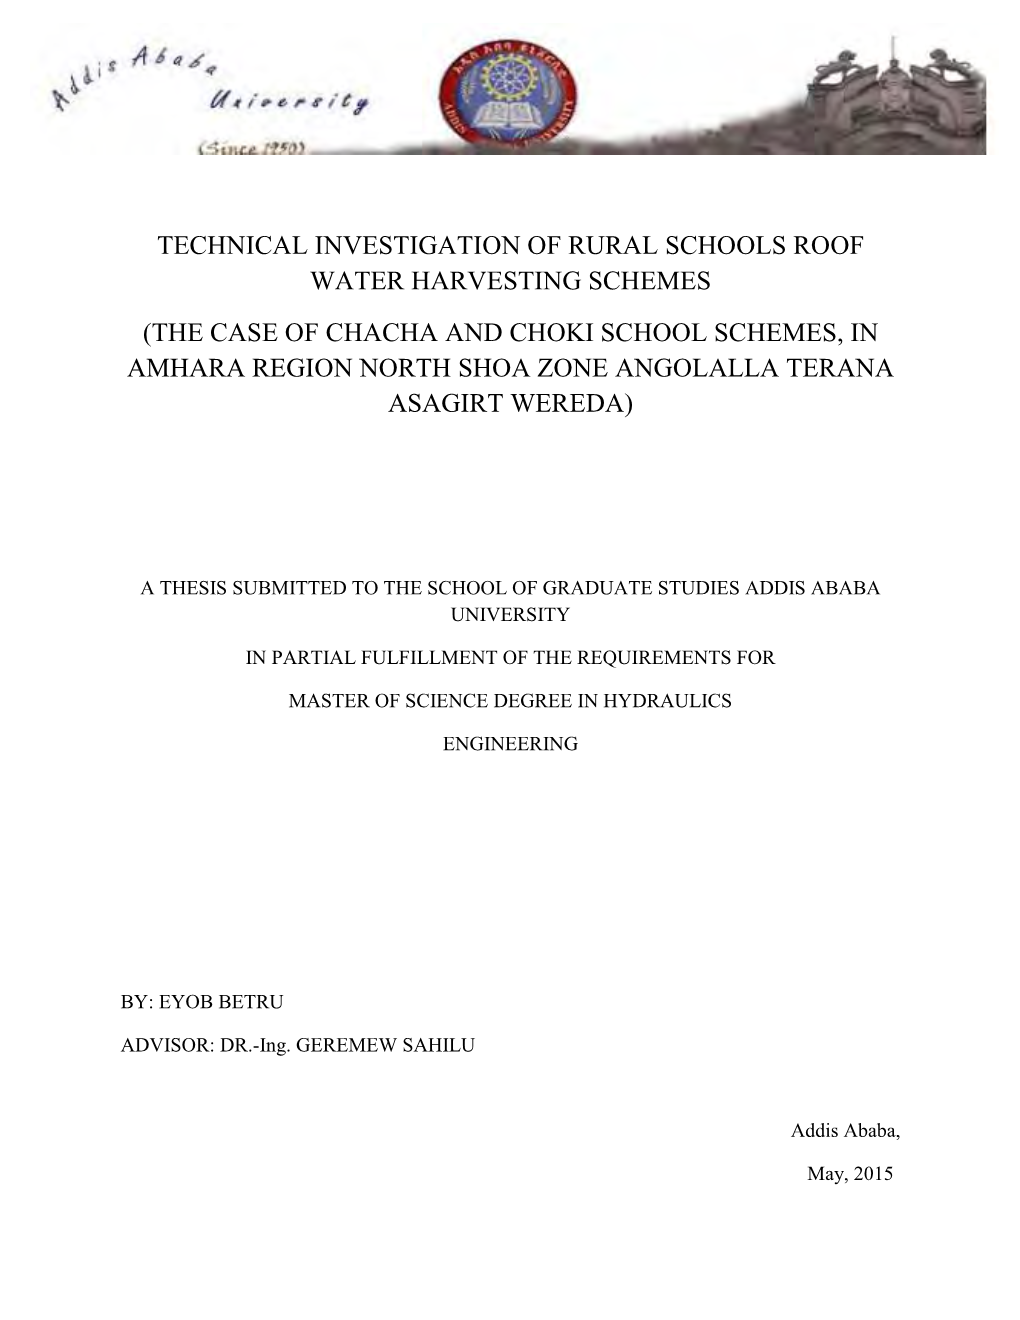 Technical Investigation of Rural Schools Roof Water Harvesting Schemes